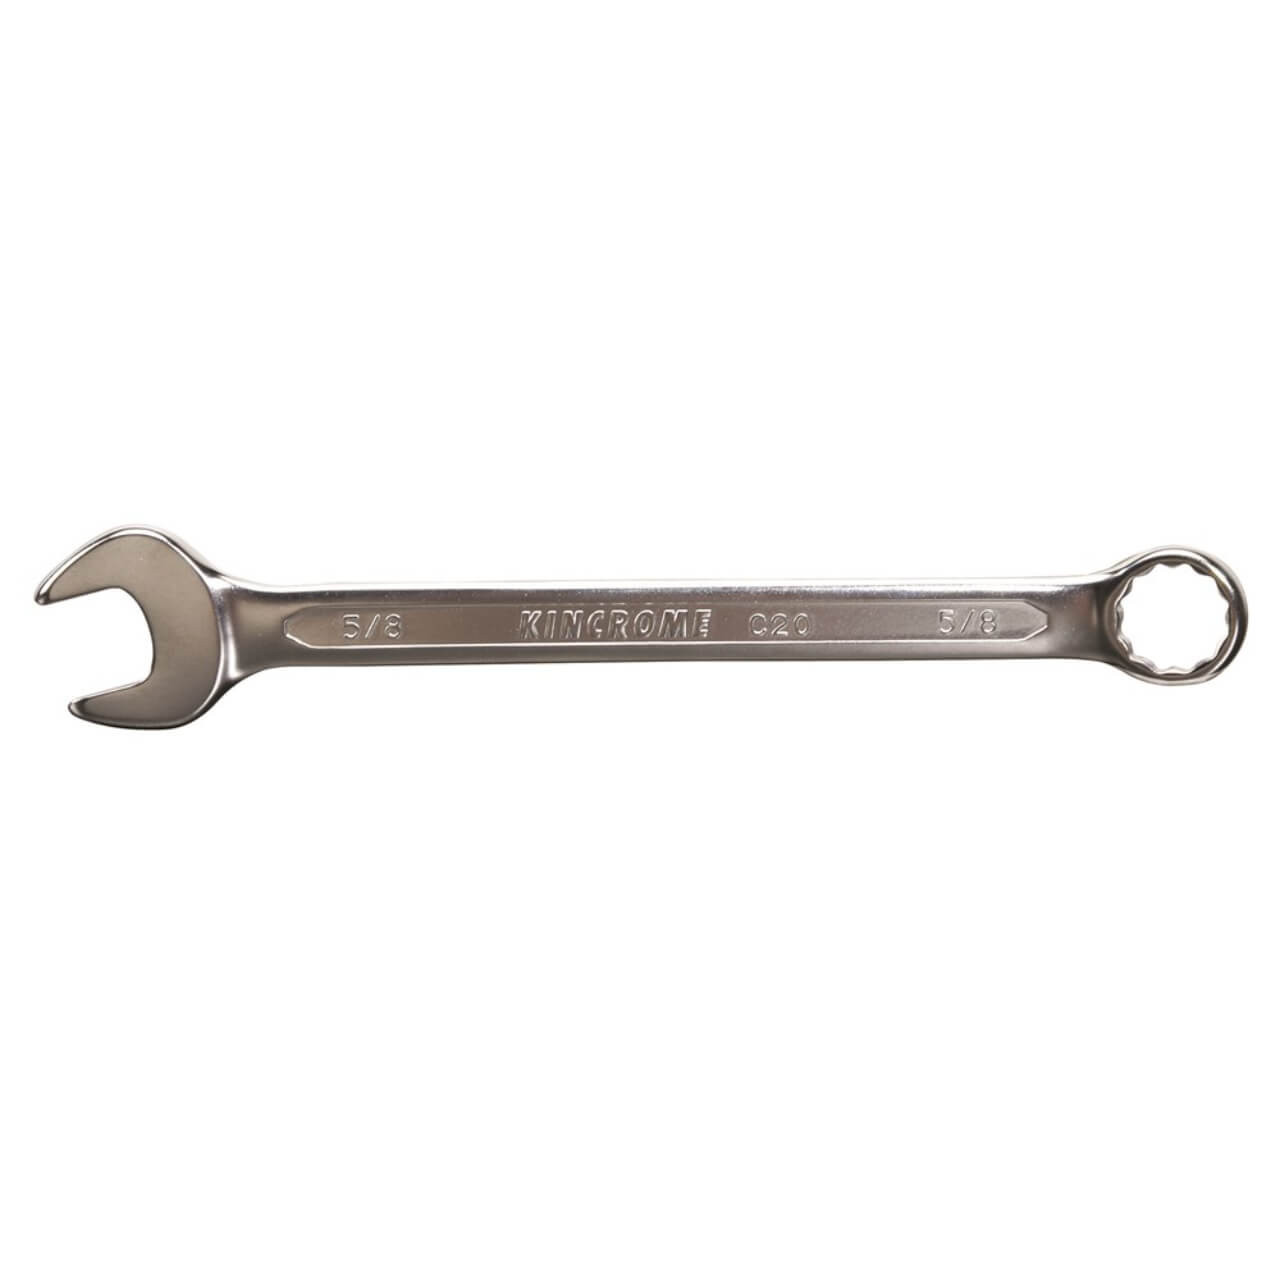 Kincrome 1-3/8 Combination ROE Spanner Imperial